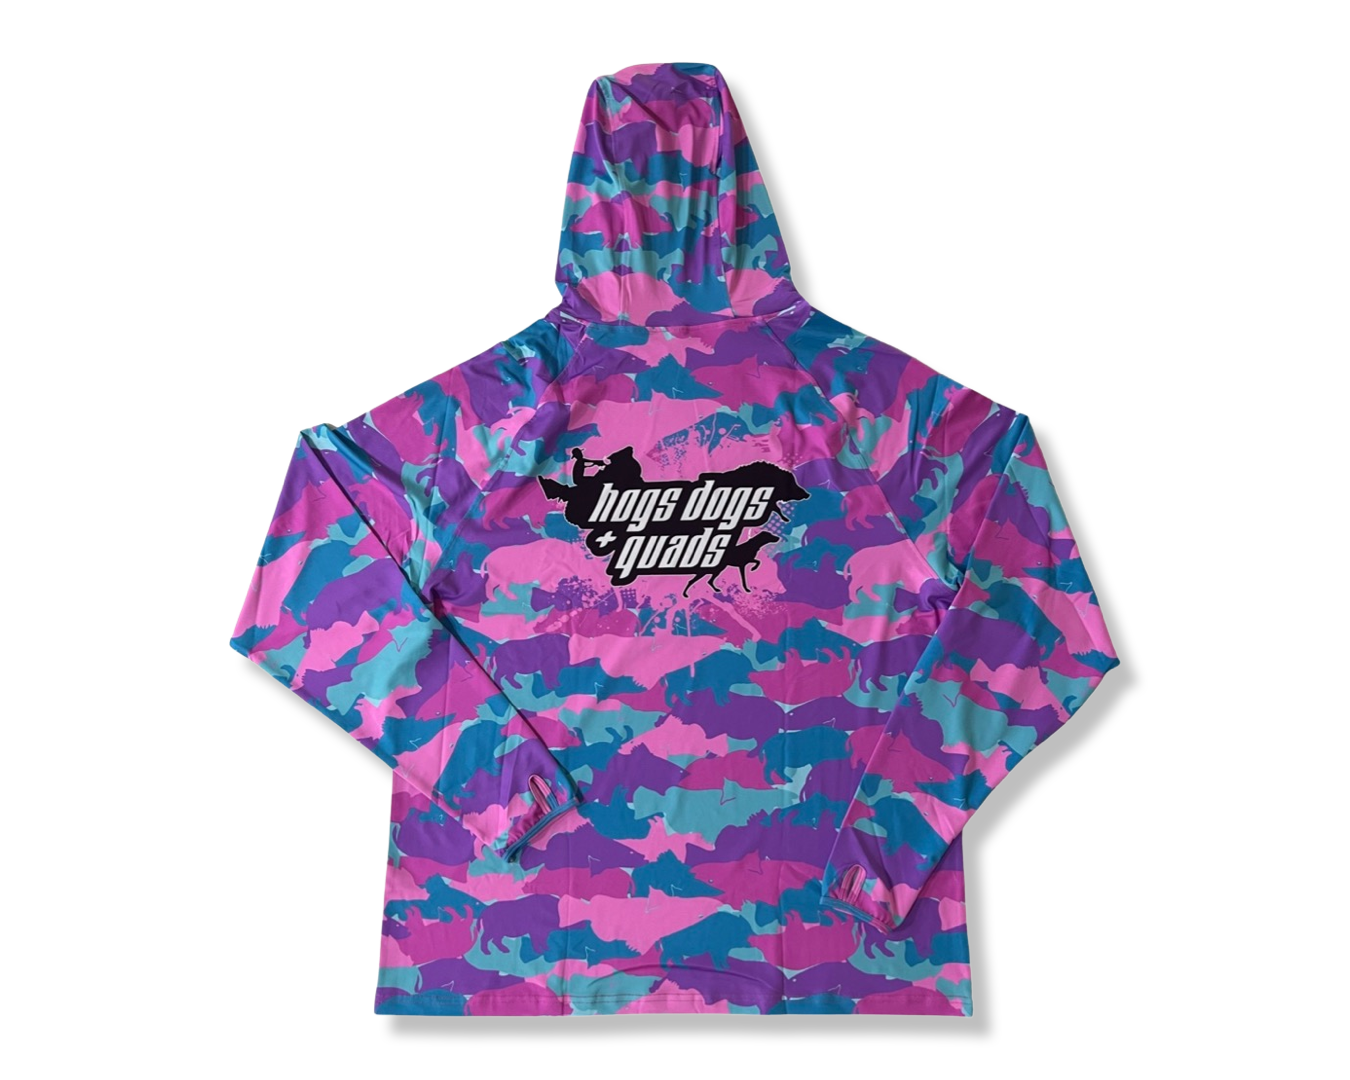 Pink & Teal Camo Hoodie & Buff in one! - Hogs Dogs Quads Shop